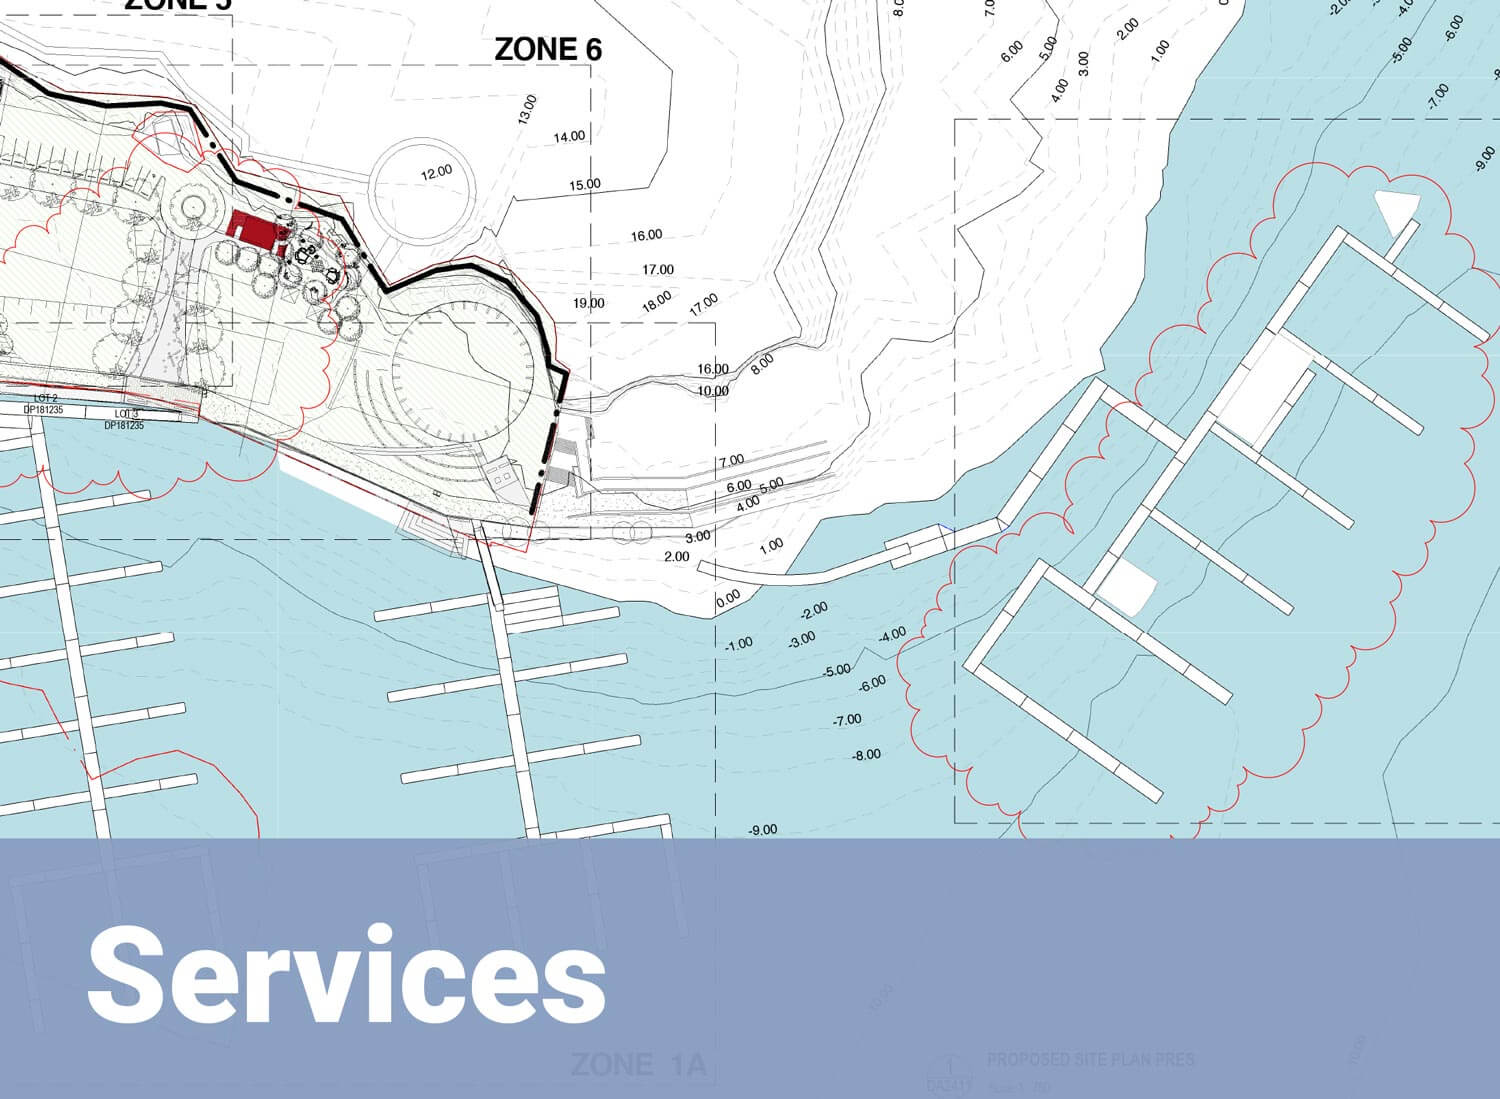 services at Ingham planning